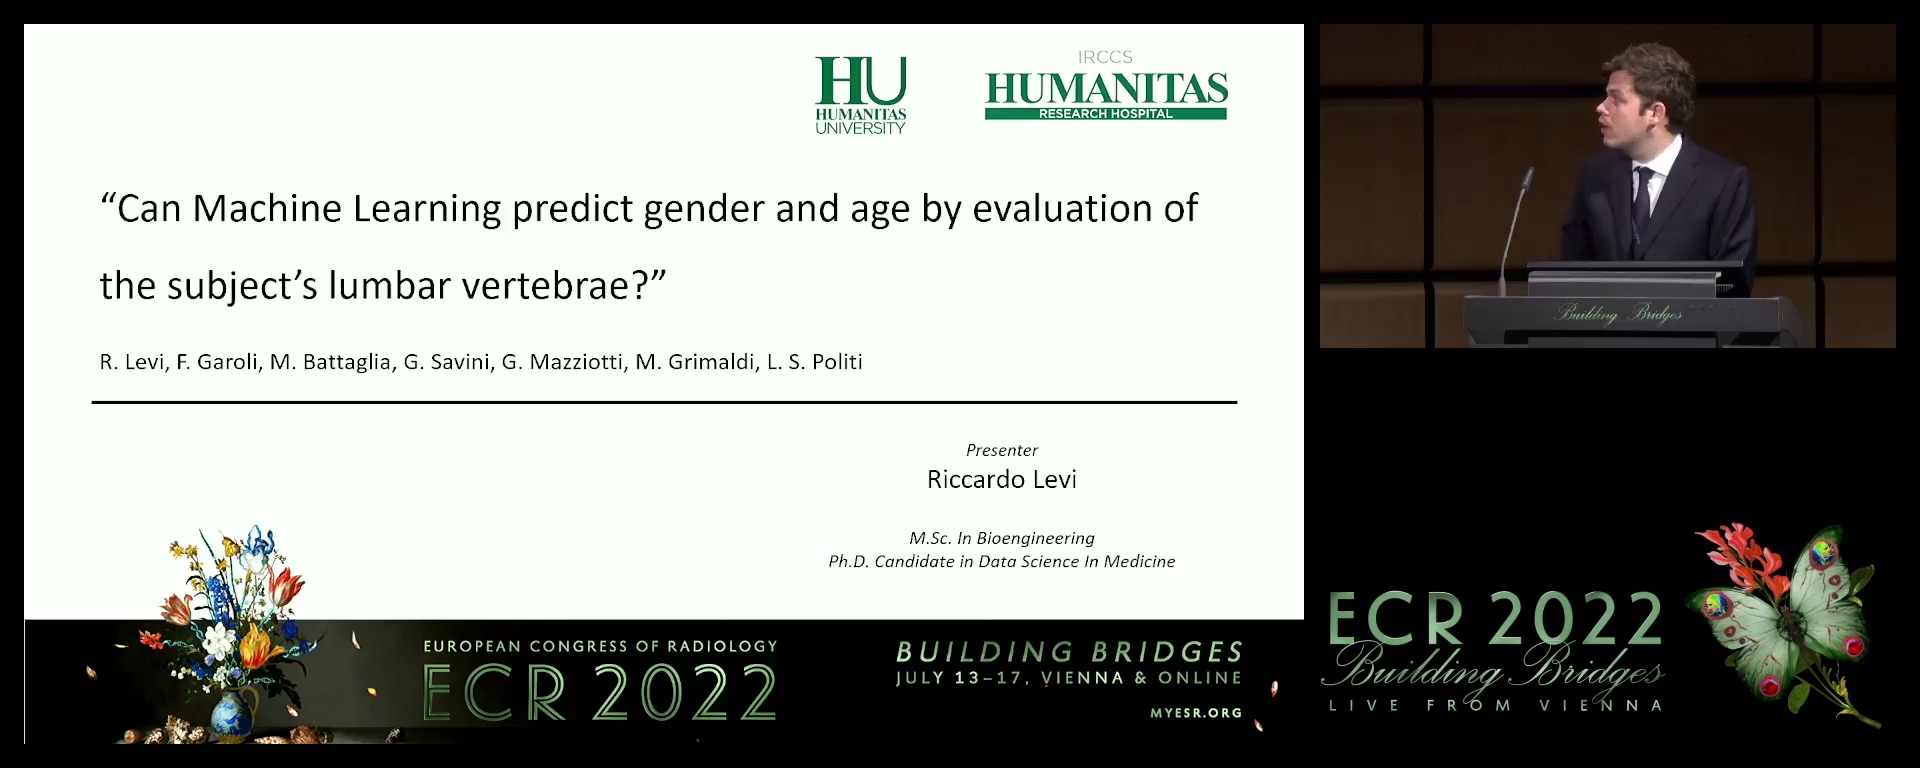 Can machine learning predict gender and age by evaluation of the subject's lumbar vertebrae?